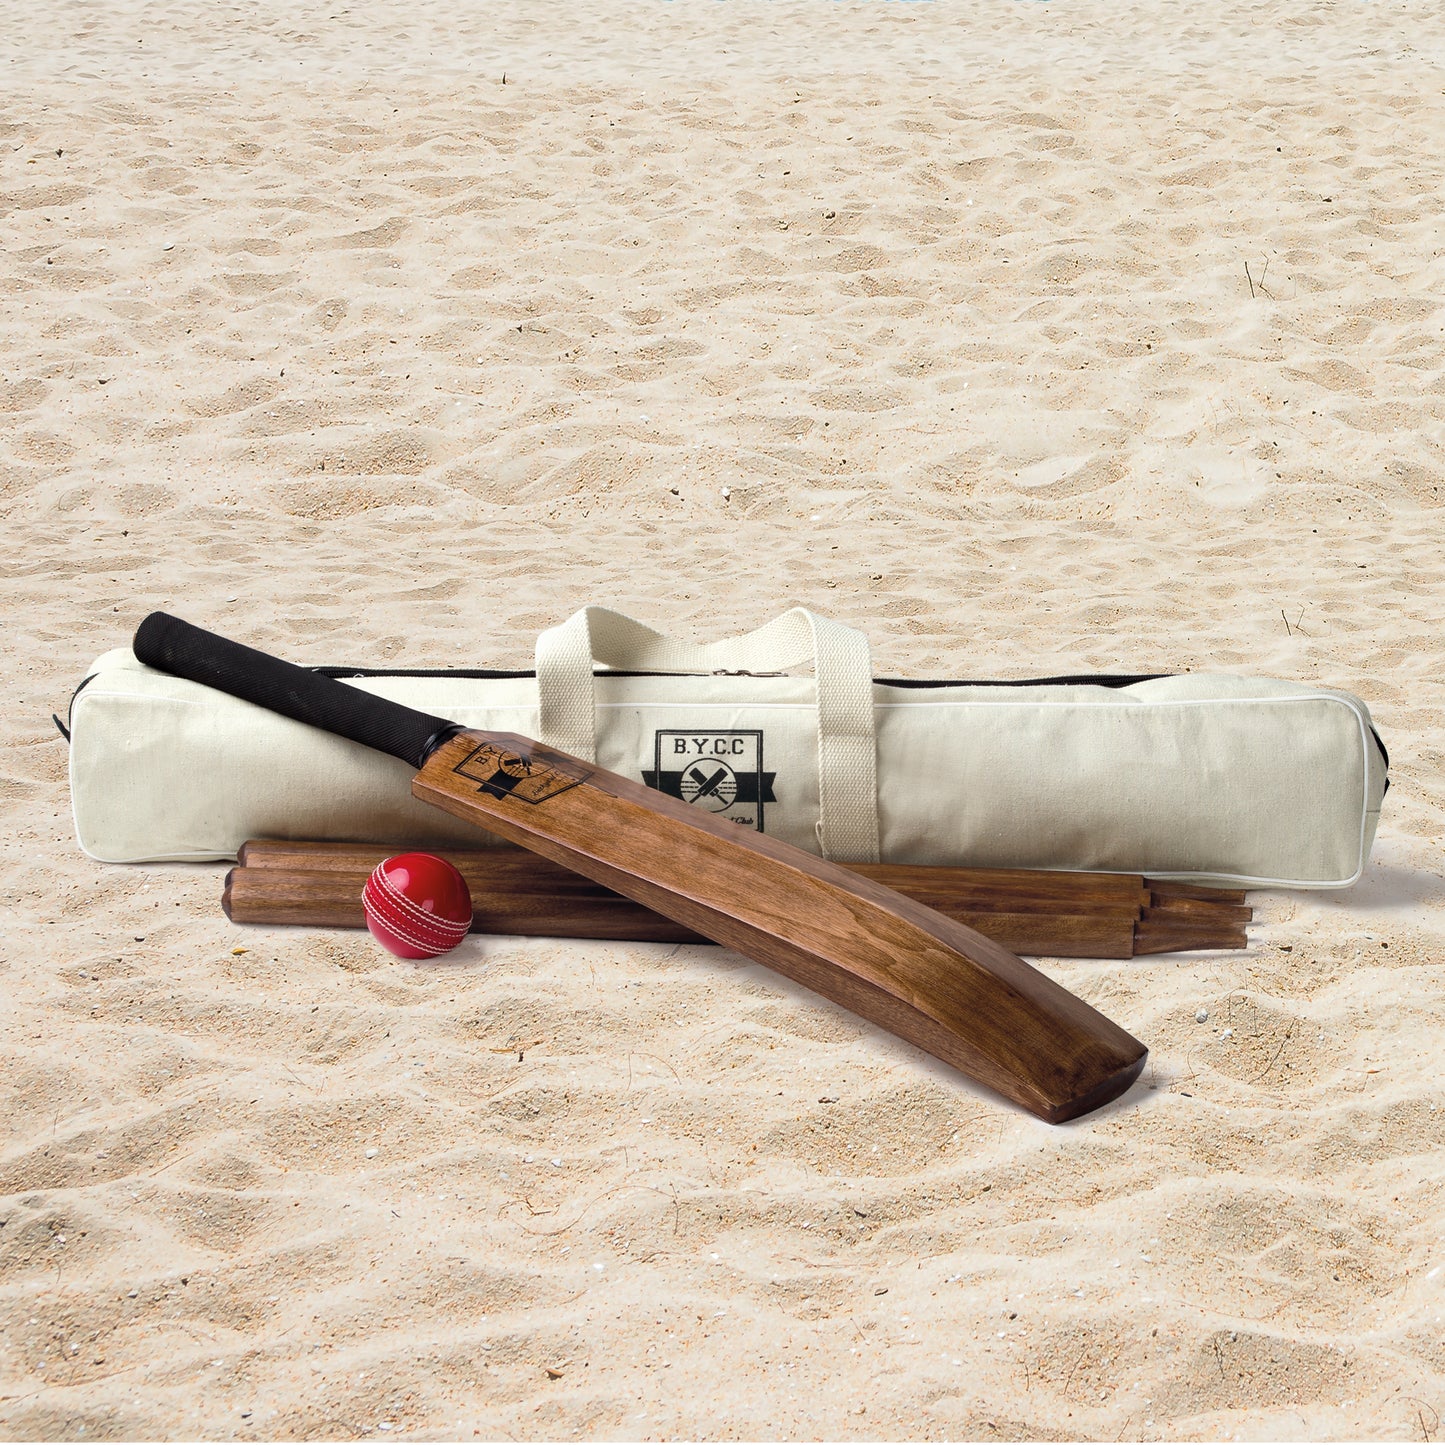 lifestyle photograph of timber cricket set and canvas carry bag on the sand at the beach